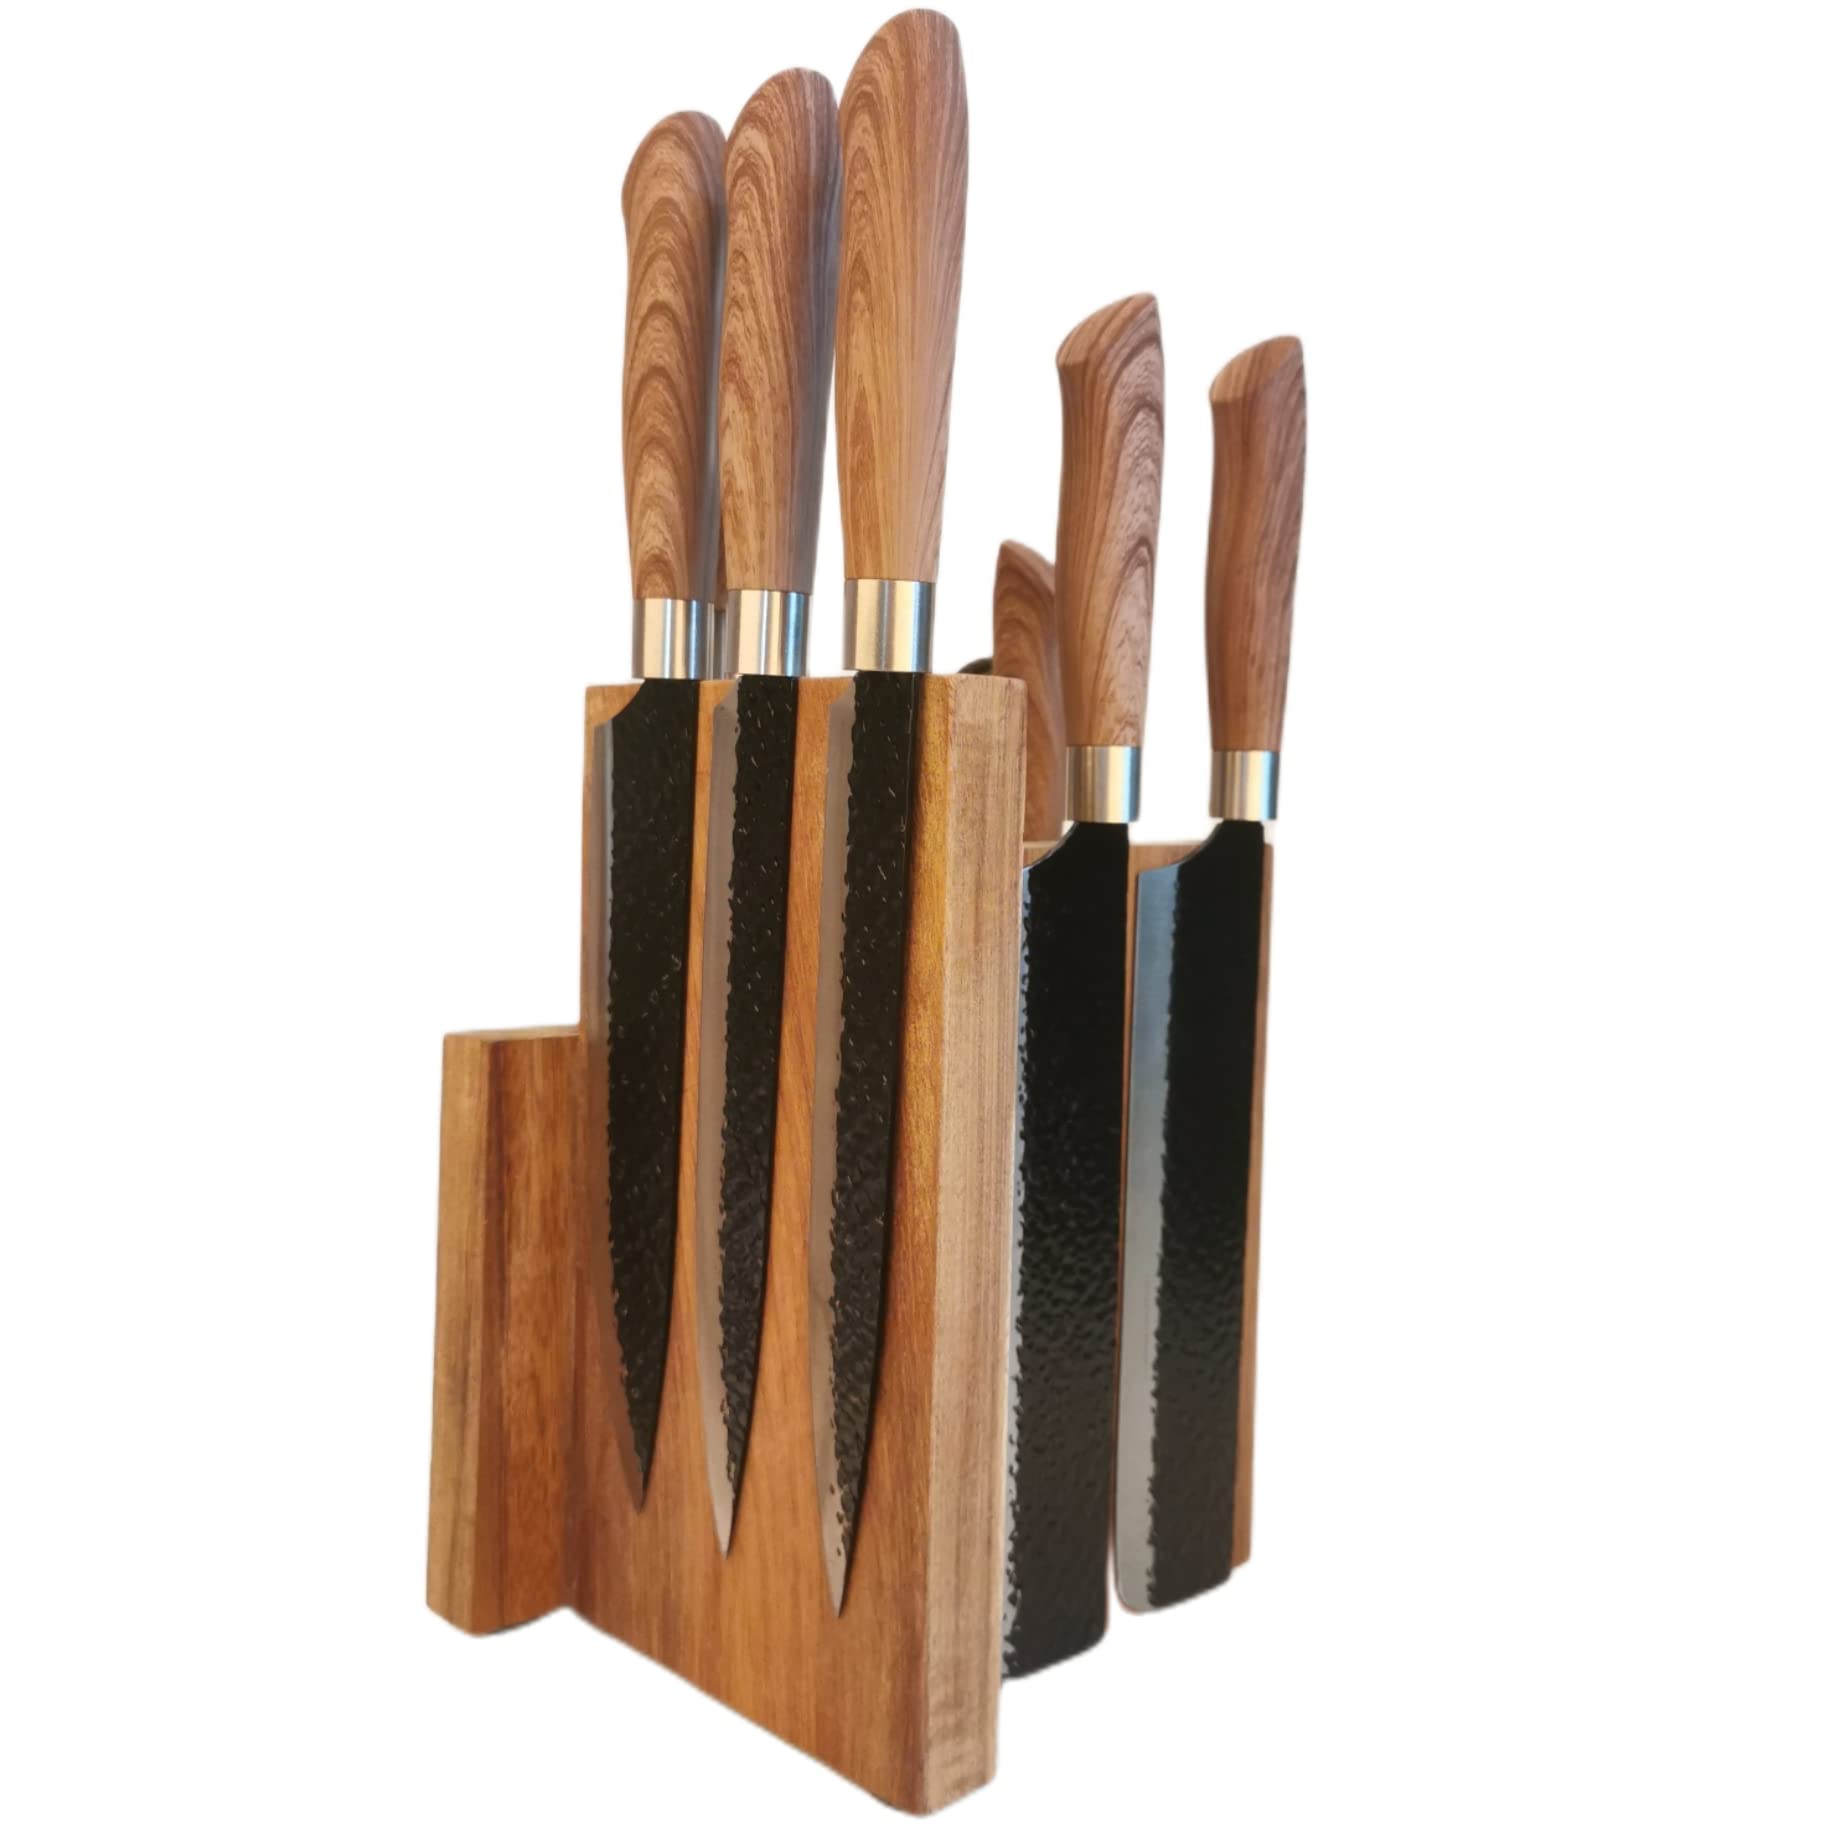 Azauvc Knife Block With Strong Magnets,Magnetic Knife Holder without Knives,Display Stand and Storage Rack